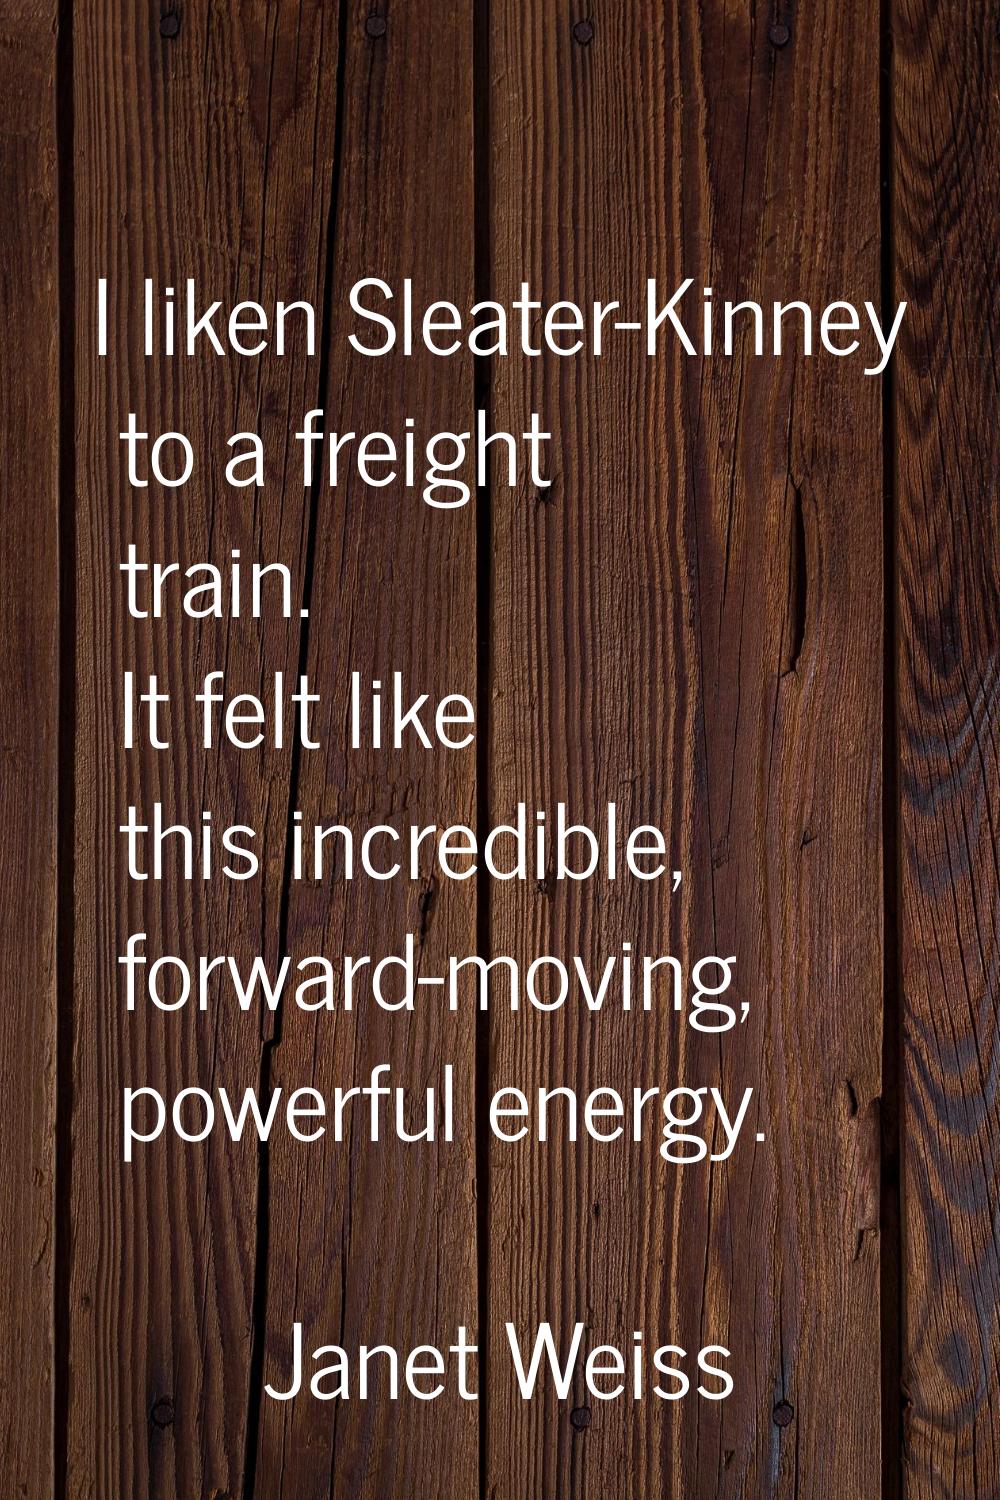 I liken Sleater-Kinney to a freight train. It felt like this incredible, forward-moving, powerful e